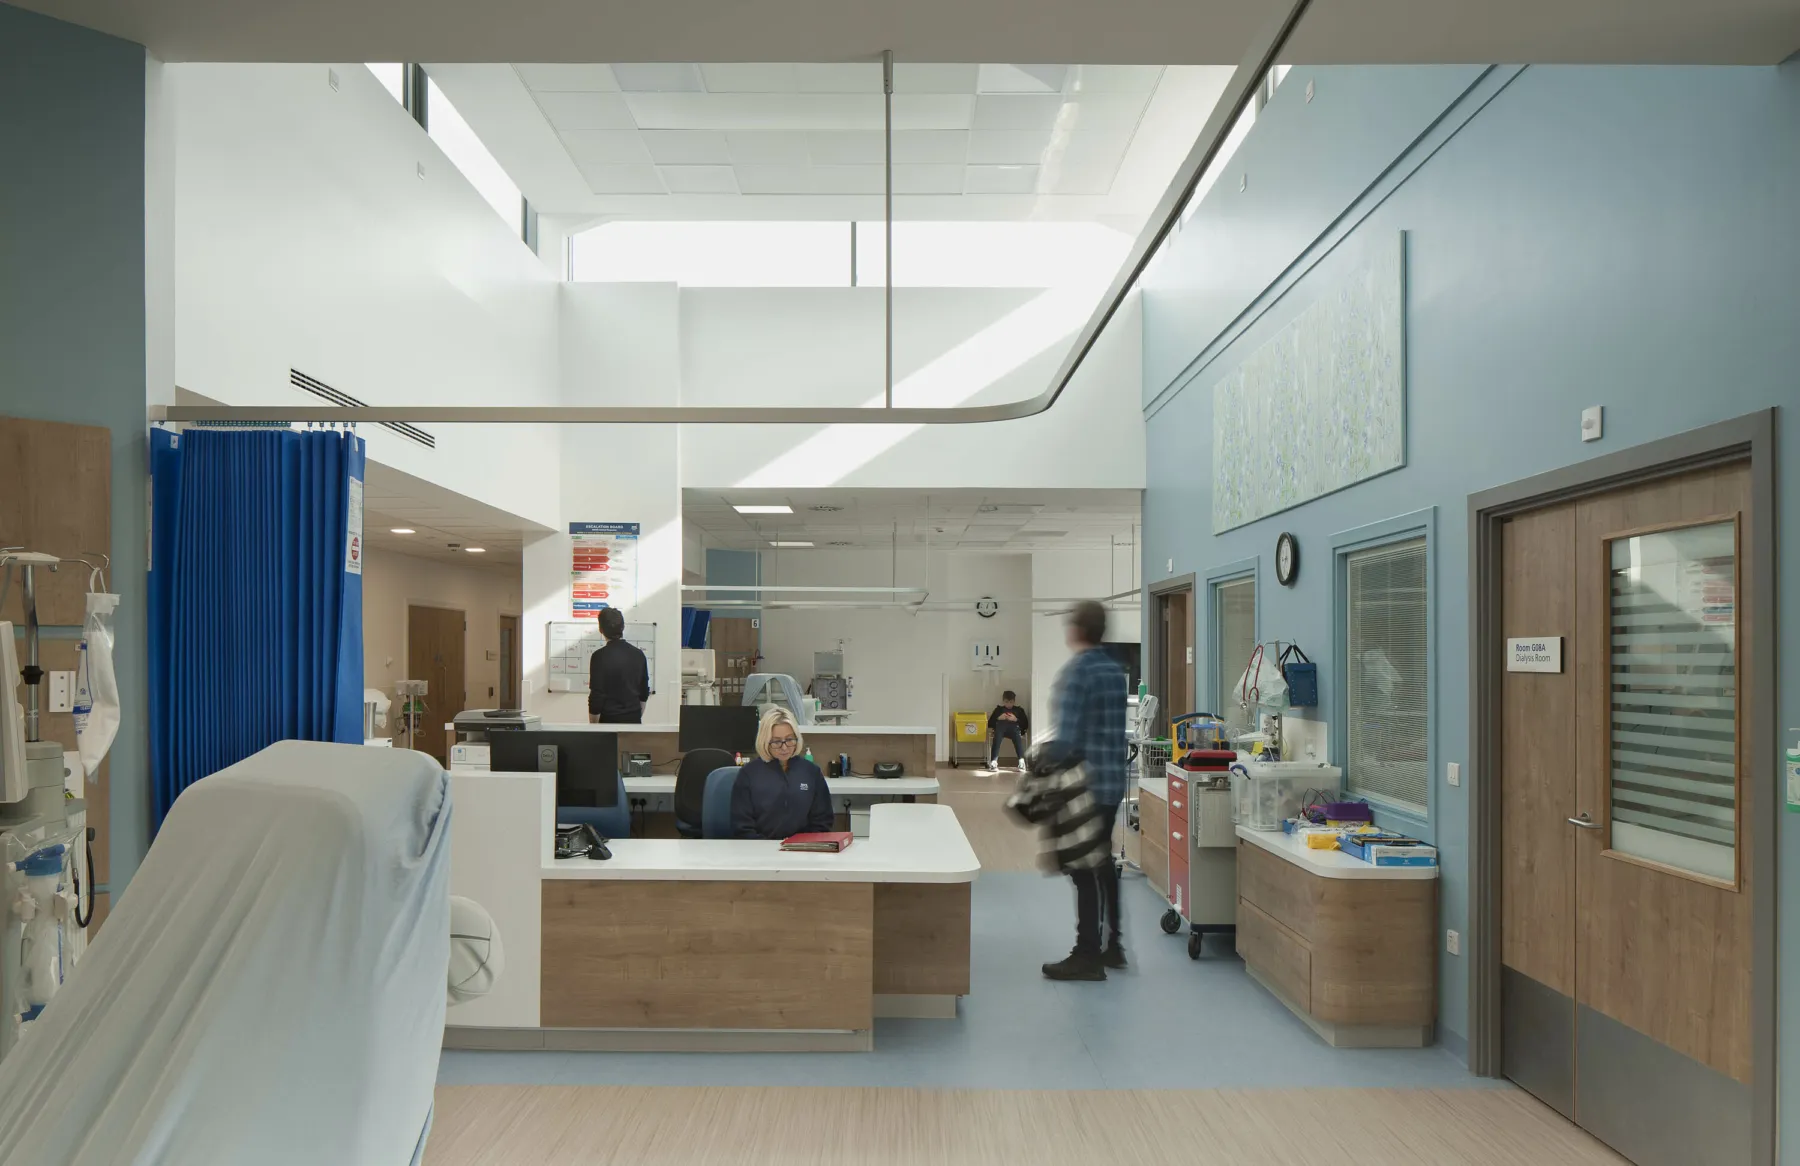 At reception in the Renal Dialysis Unit, Edinburgh - a purpose built healthcare facility at the Western General Hospital. A member of staff receives a visitor at the reception desk in the double height, naturally lit space.